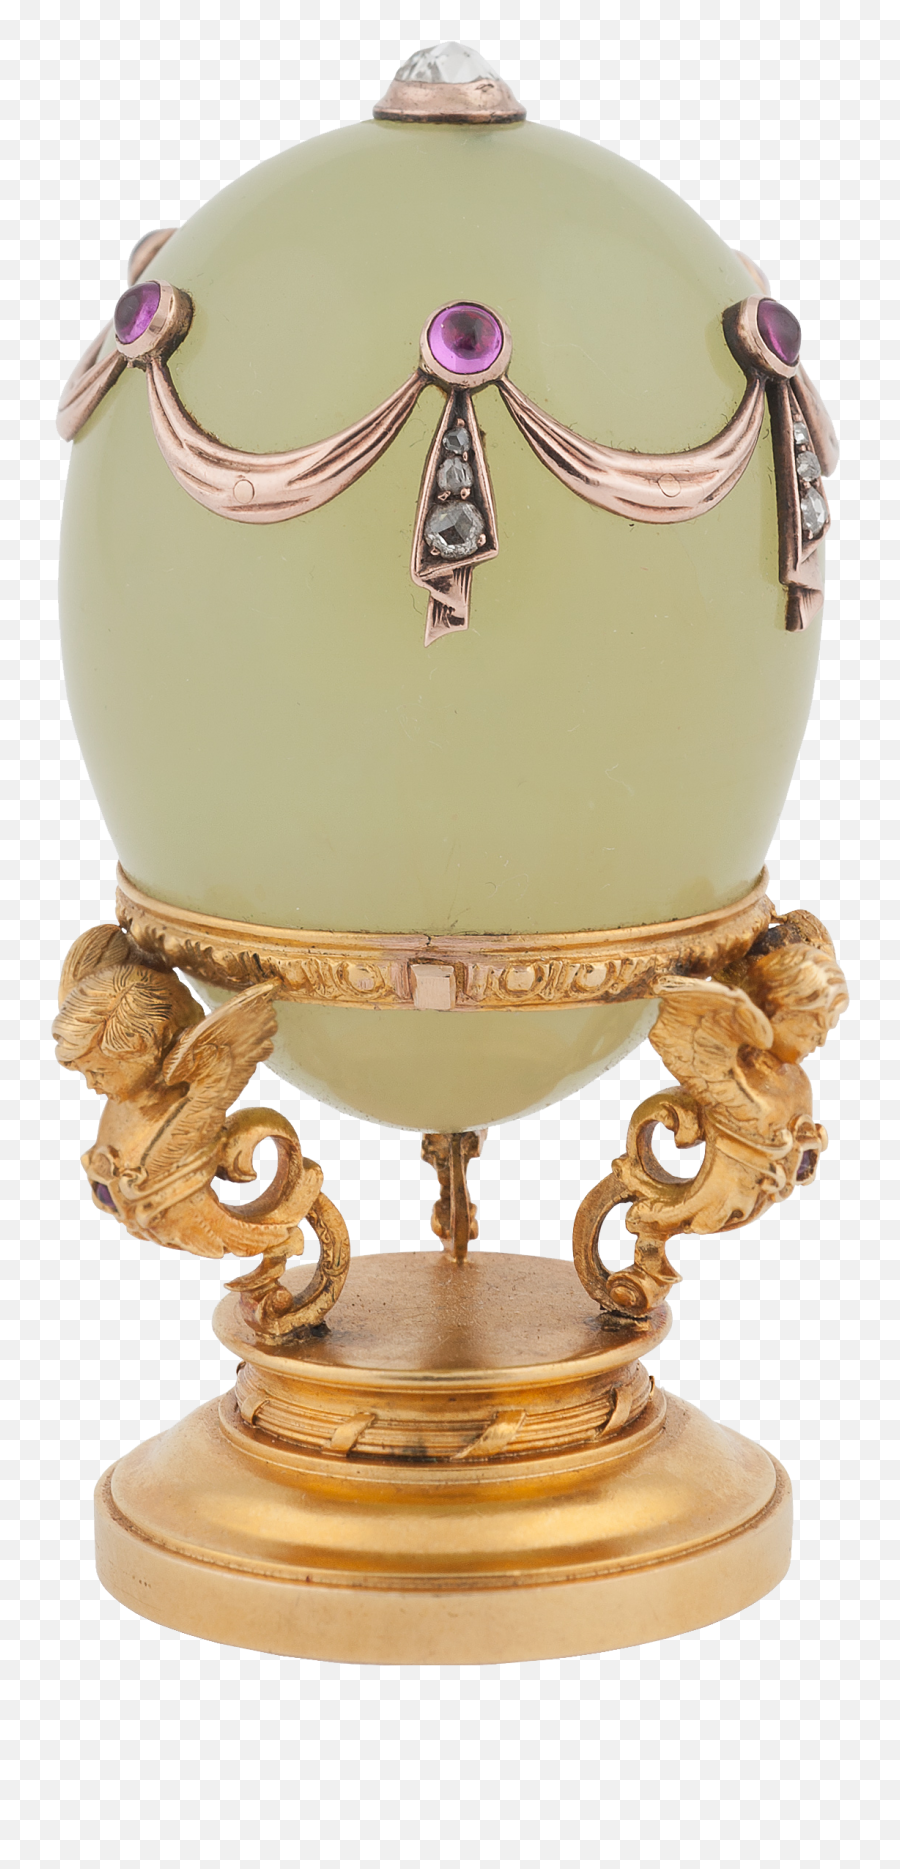 Fileegg - Stamp Fabergé Eggpng Wikimedia Commons Egg Stamp Faberge Egg,Egg Png